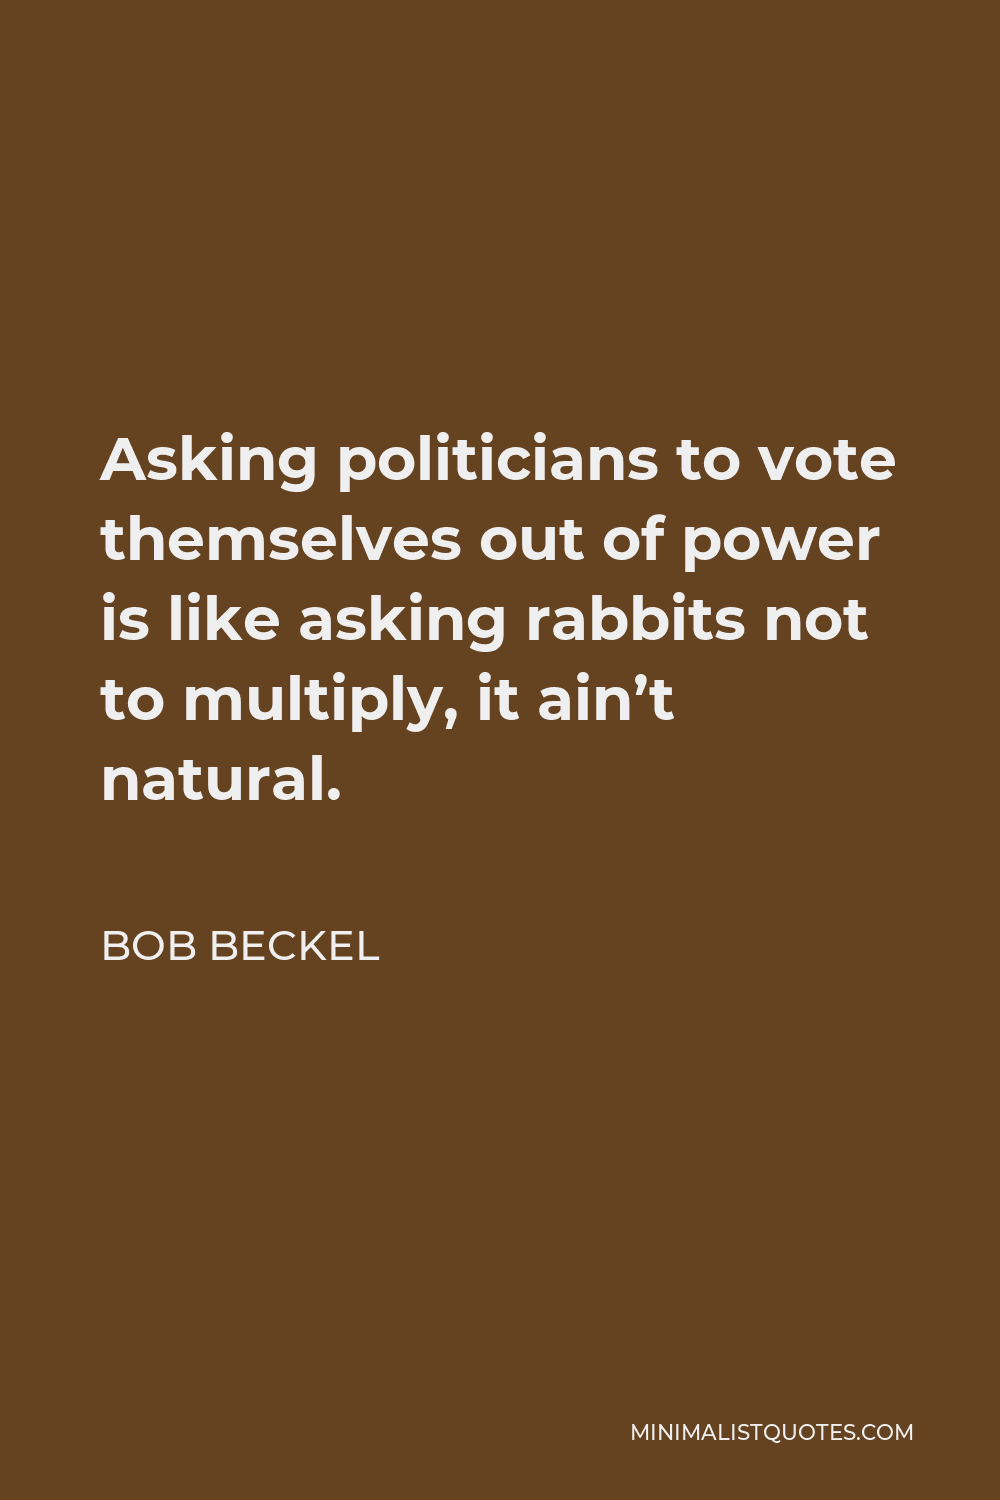 Bob Beckel Quote - Asking politicians to vote themselves out of power is like asking rabbits not to multiply, it ain’t natural.